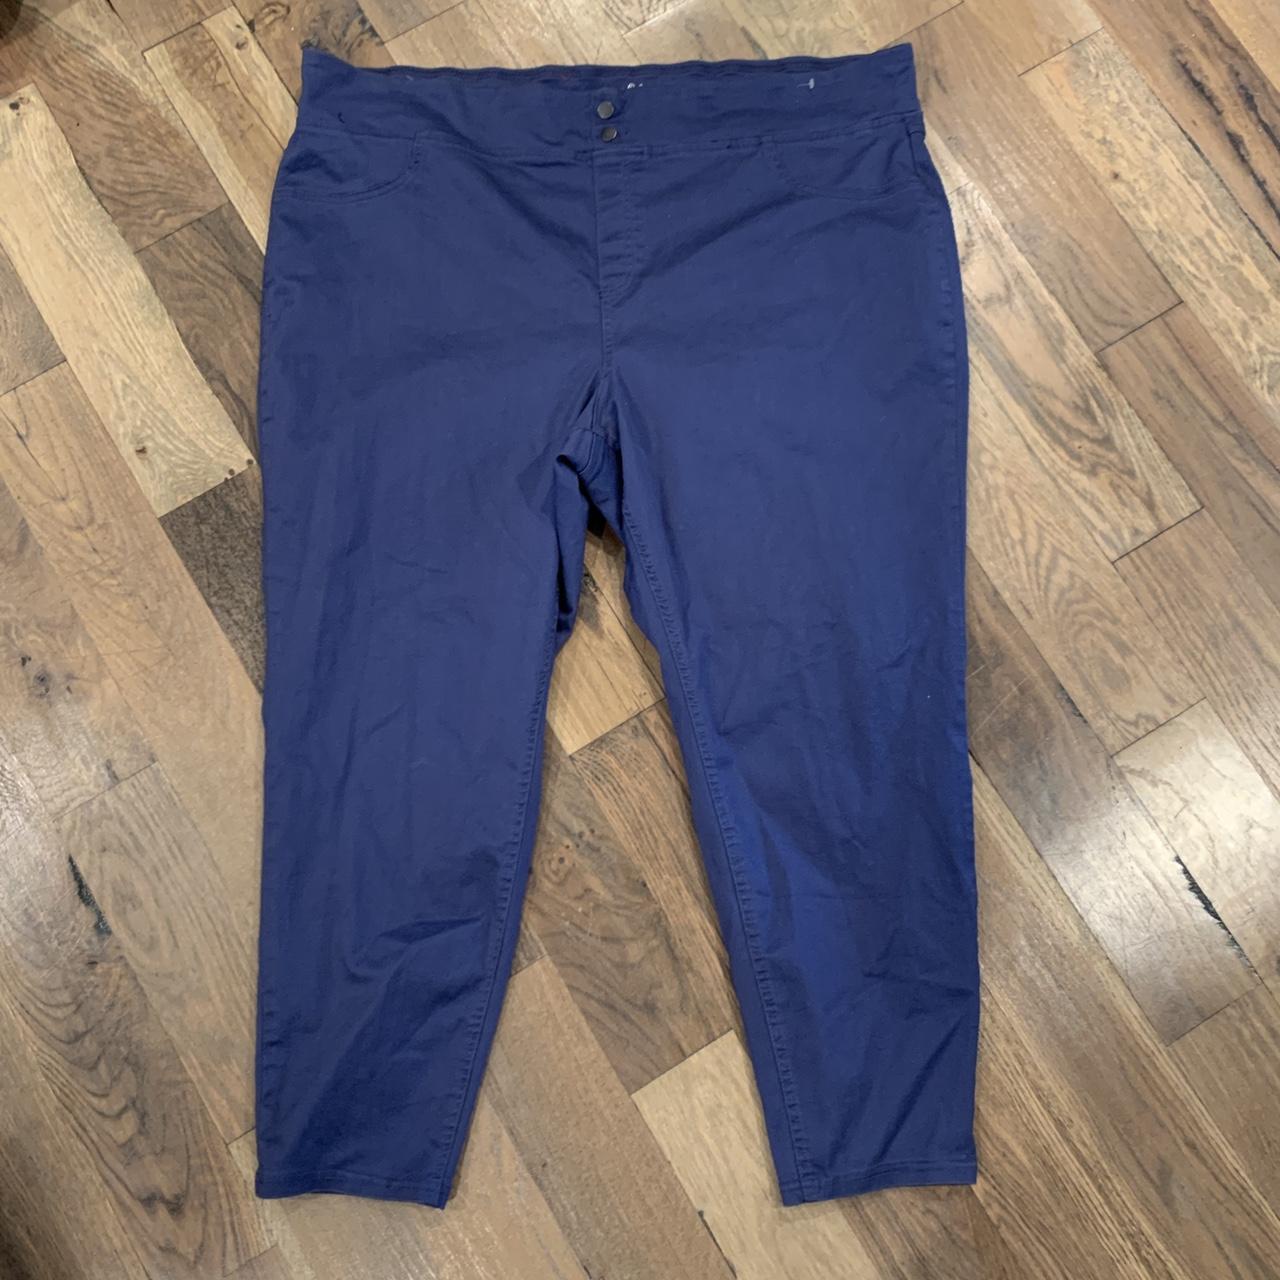 Terra & Sky Blue Stretched Cropped Pants Size 3X - Depop